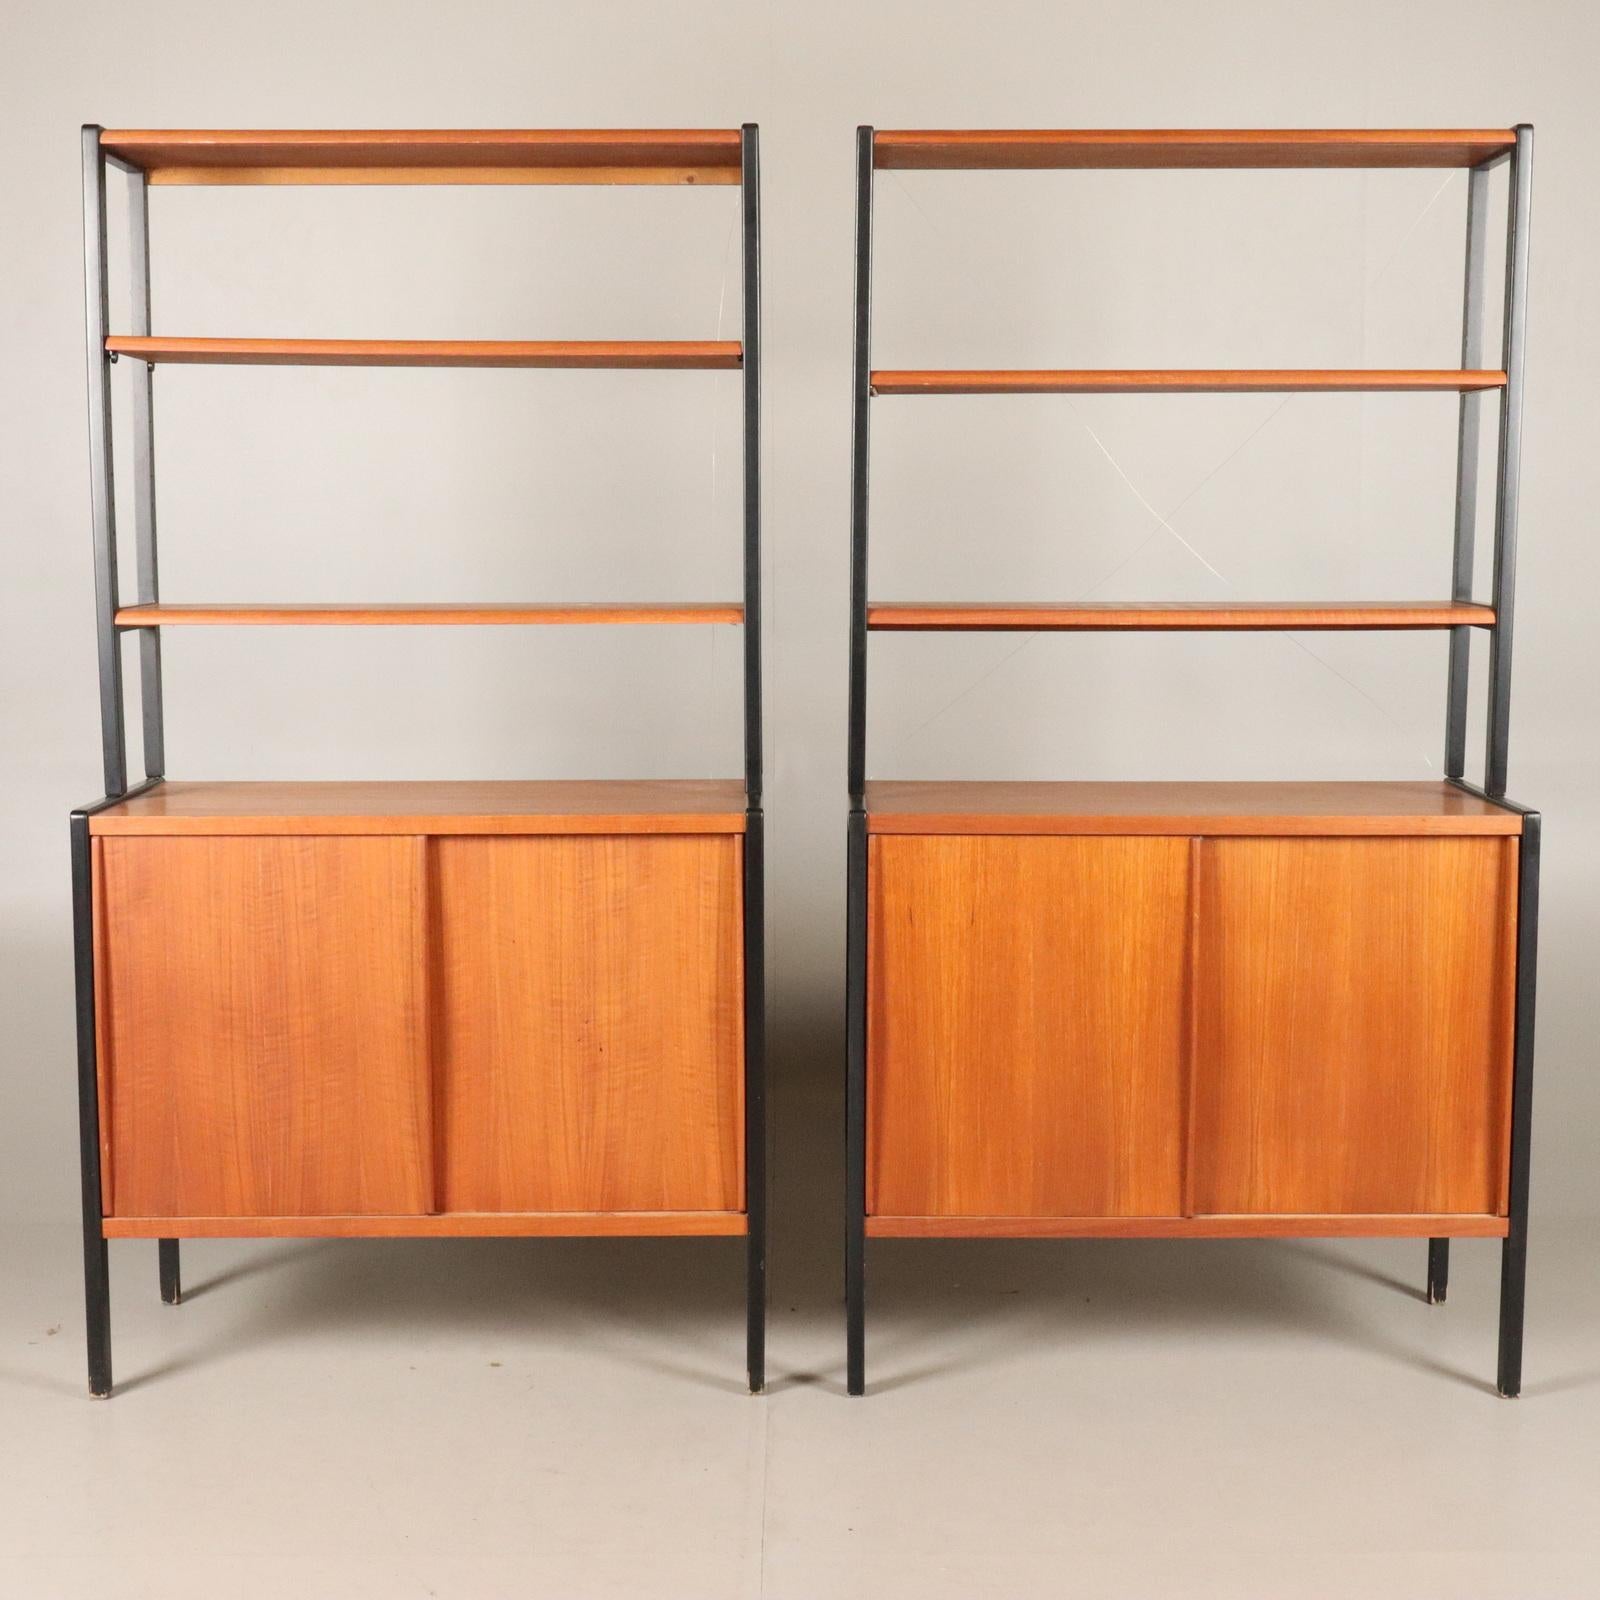 Beautiful and elegant teak bookcase cabinet, designed by Bertil Fridhagen for Bodafors, Sweden, 1958.

The body is made of teak with black lacquered sides. The lower part of the cabinet has two sliding doors, and inside the original shelf with the